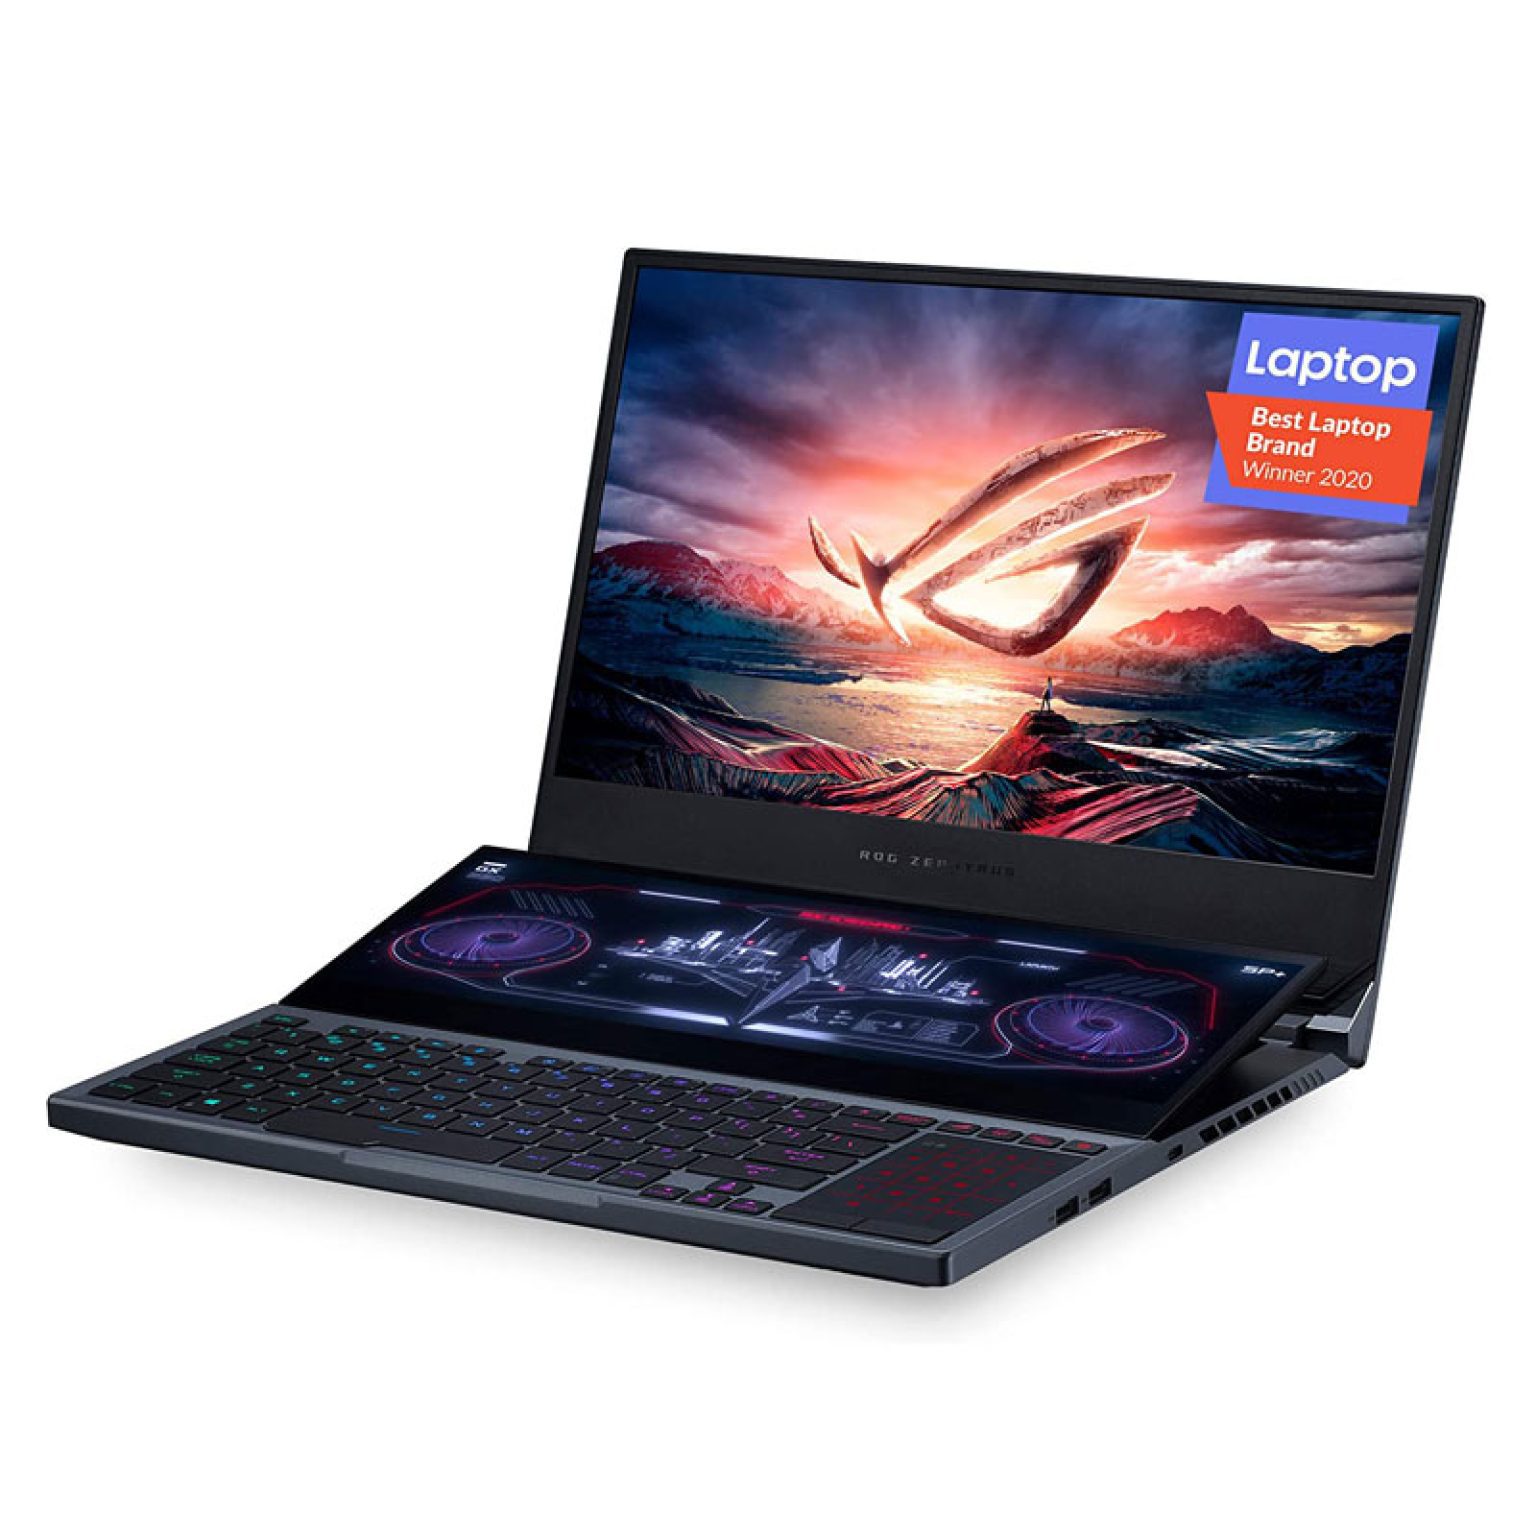 Asus Duo 15″ Dual Screen Laptop Is The Worlds First Laptop With Dual Displays Suckstobebroke 3223